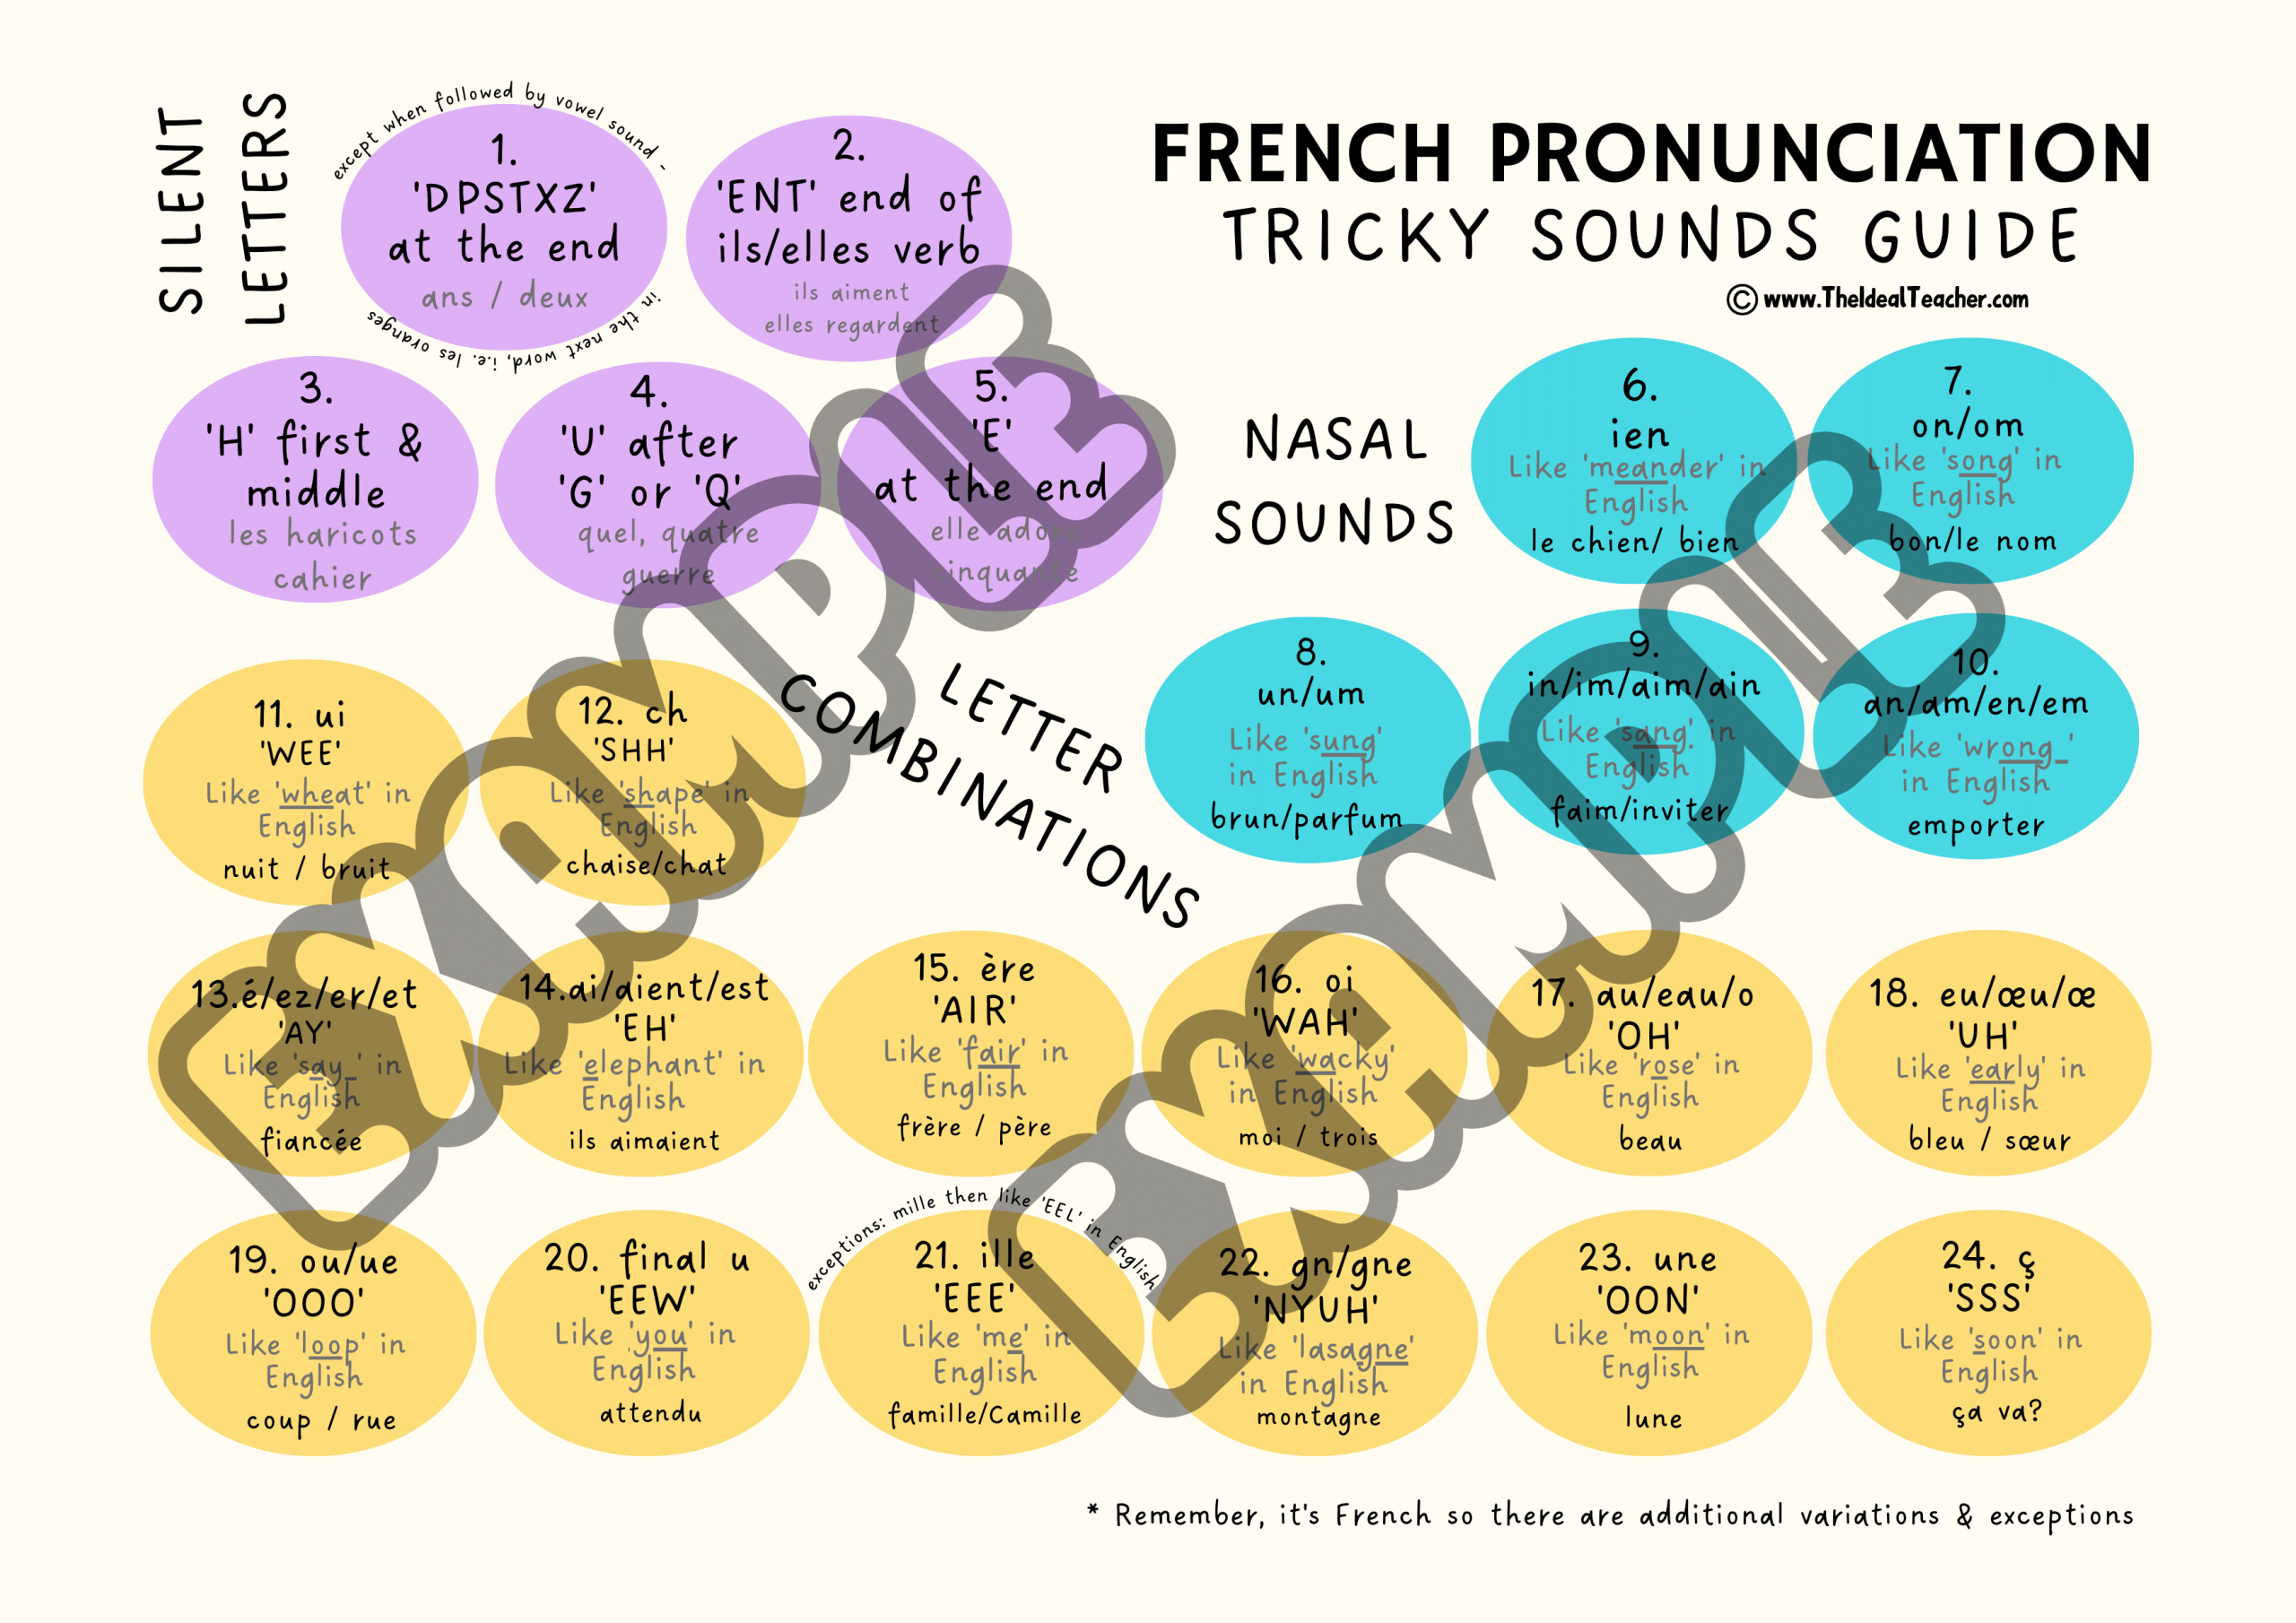 The French Pronunciation Chart You Need -Pronounce Tricky Sounds Easily